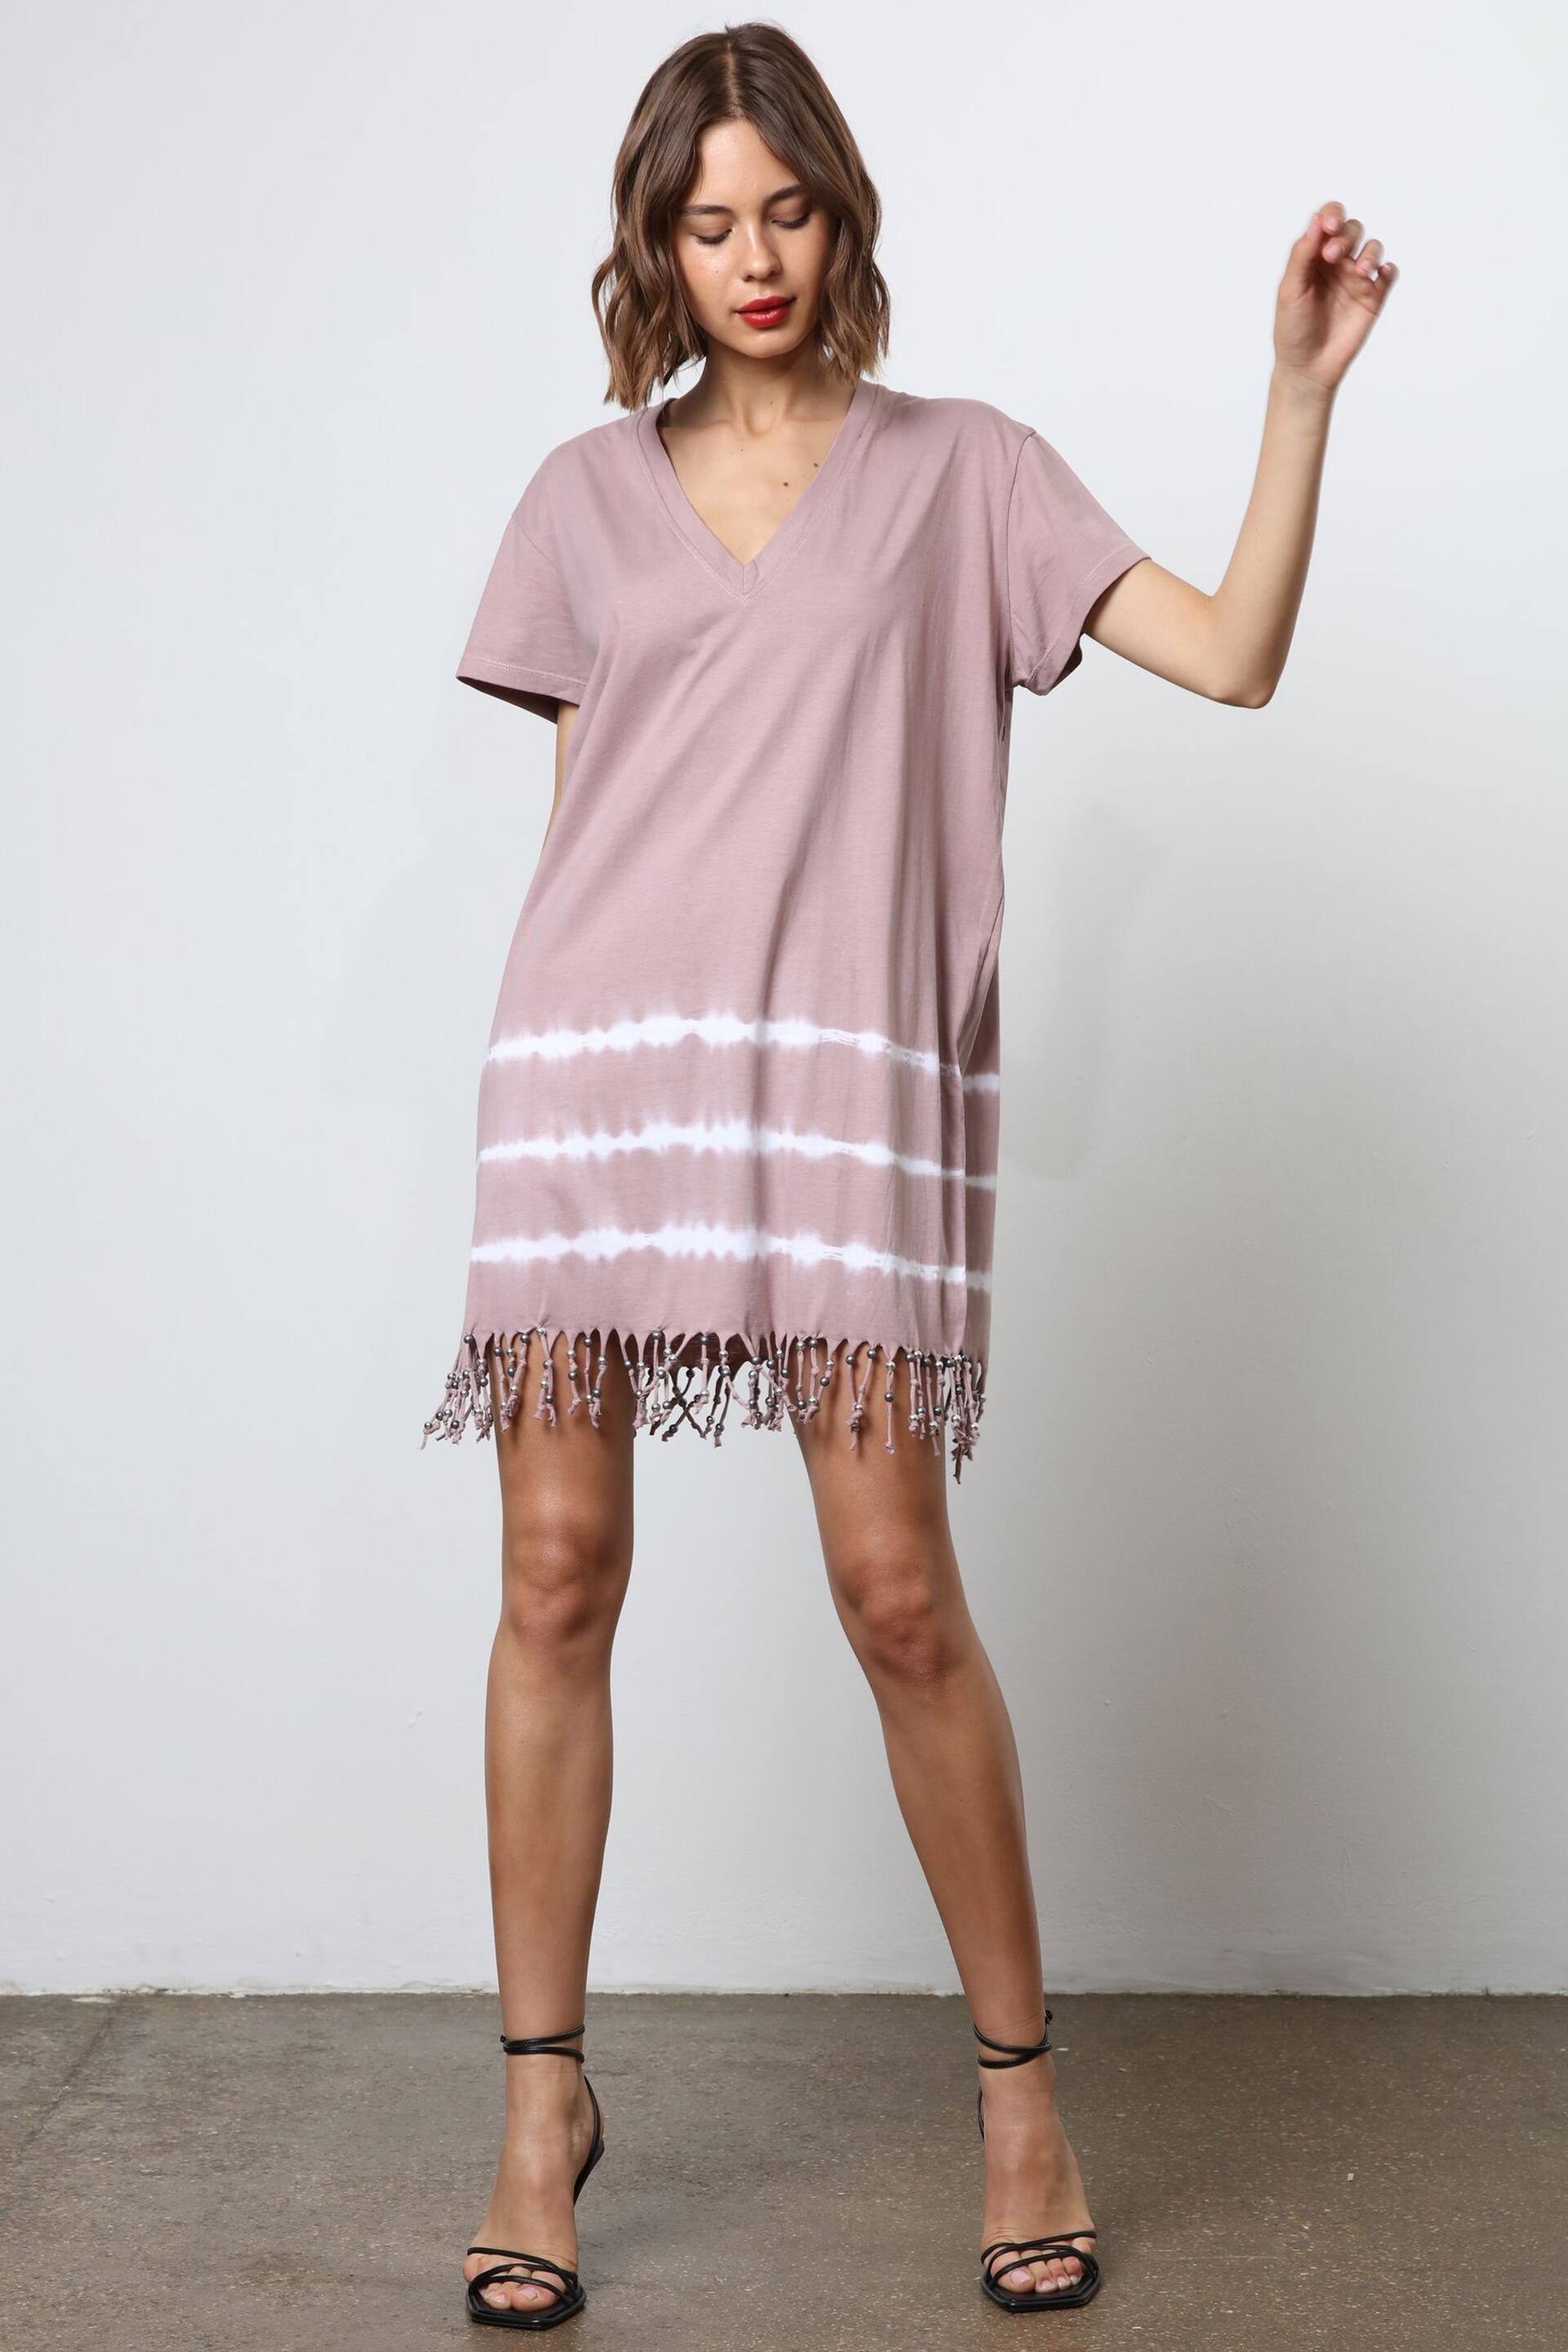 Religion Nude Particle Mini Tunic Dress With Tie Dye and Tassles - Image 3 of 6